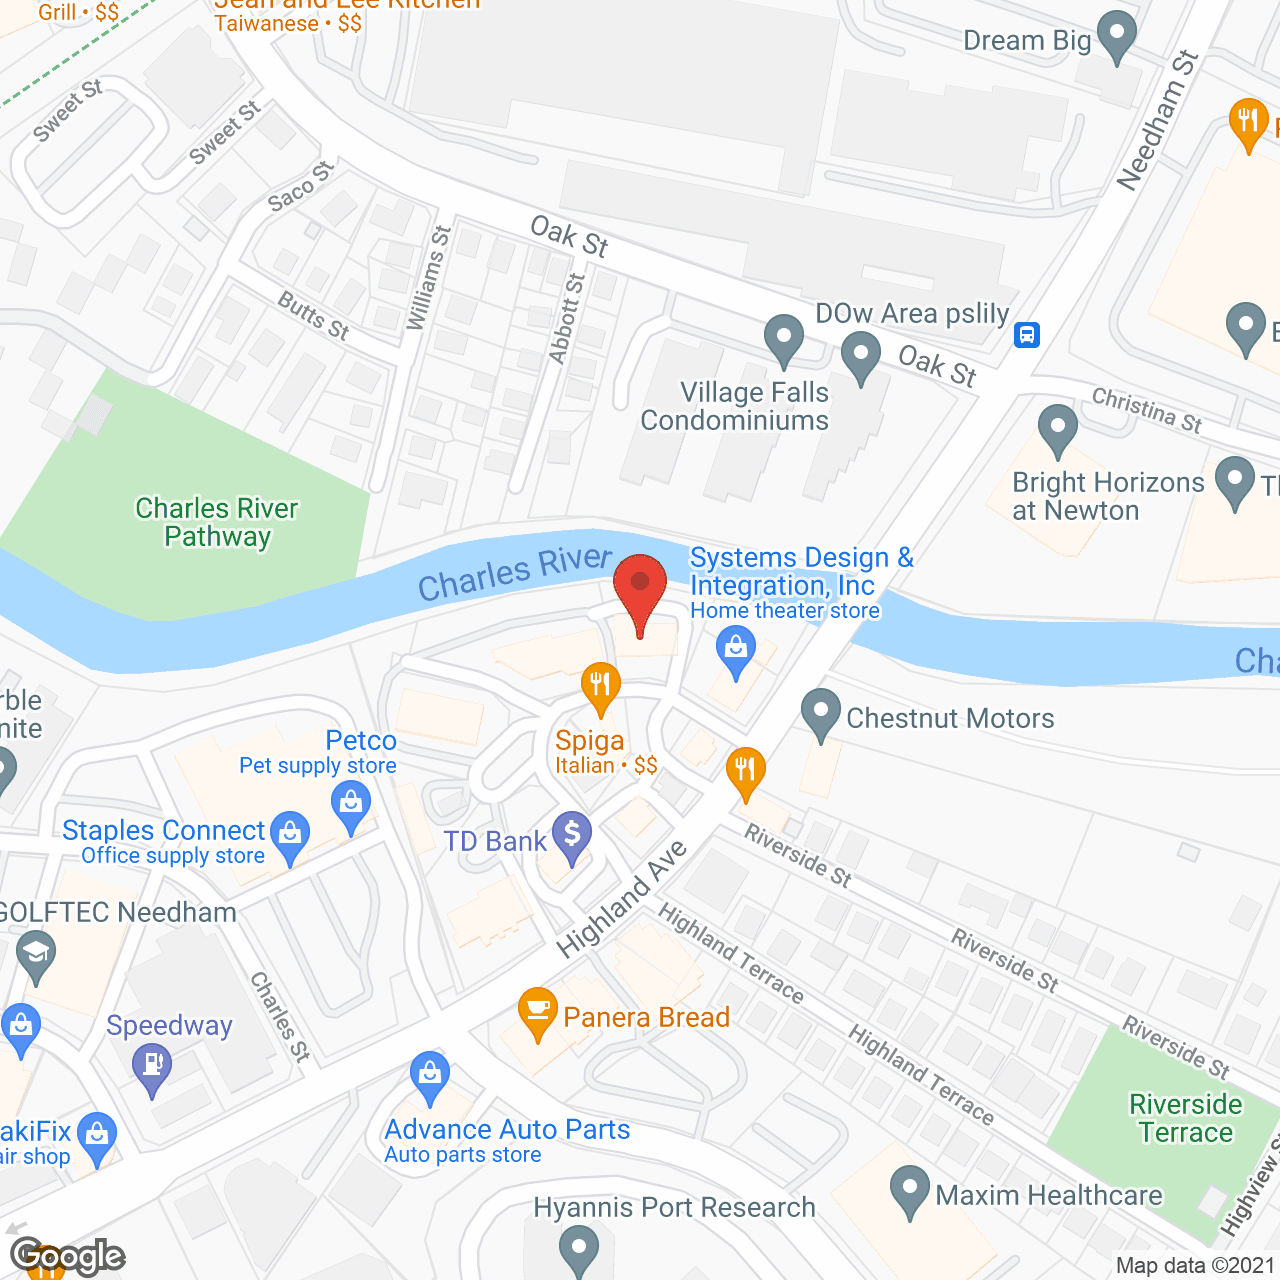 Family Friend Healthcare in google map